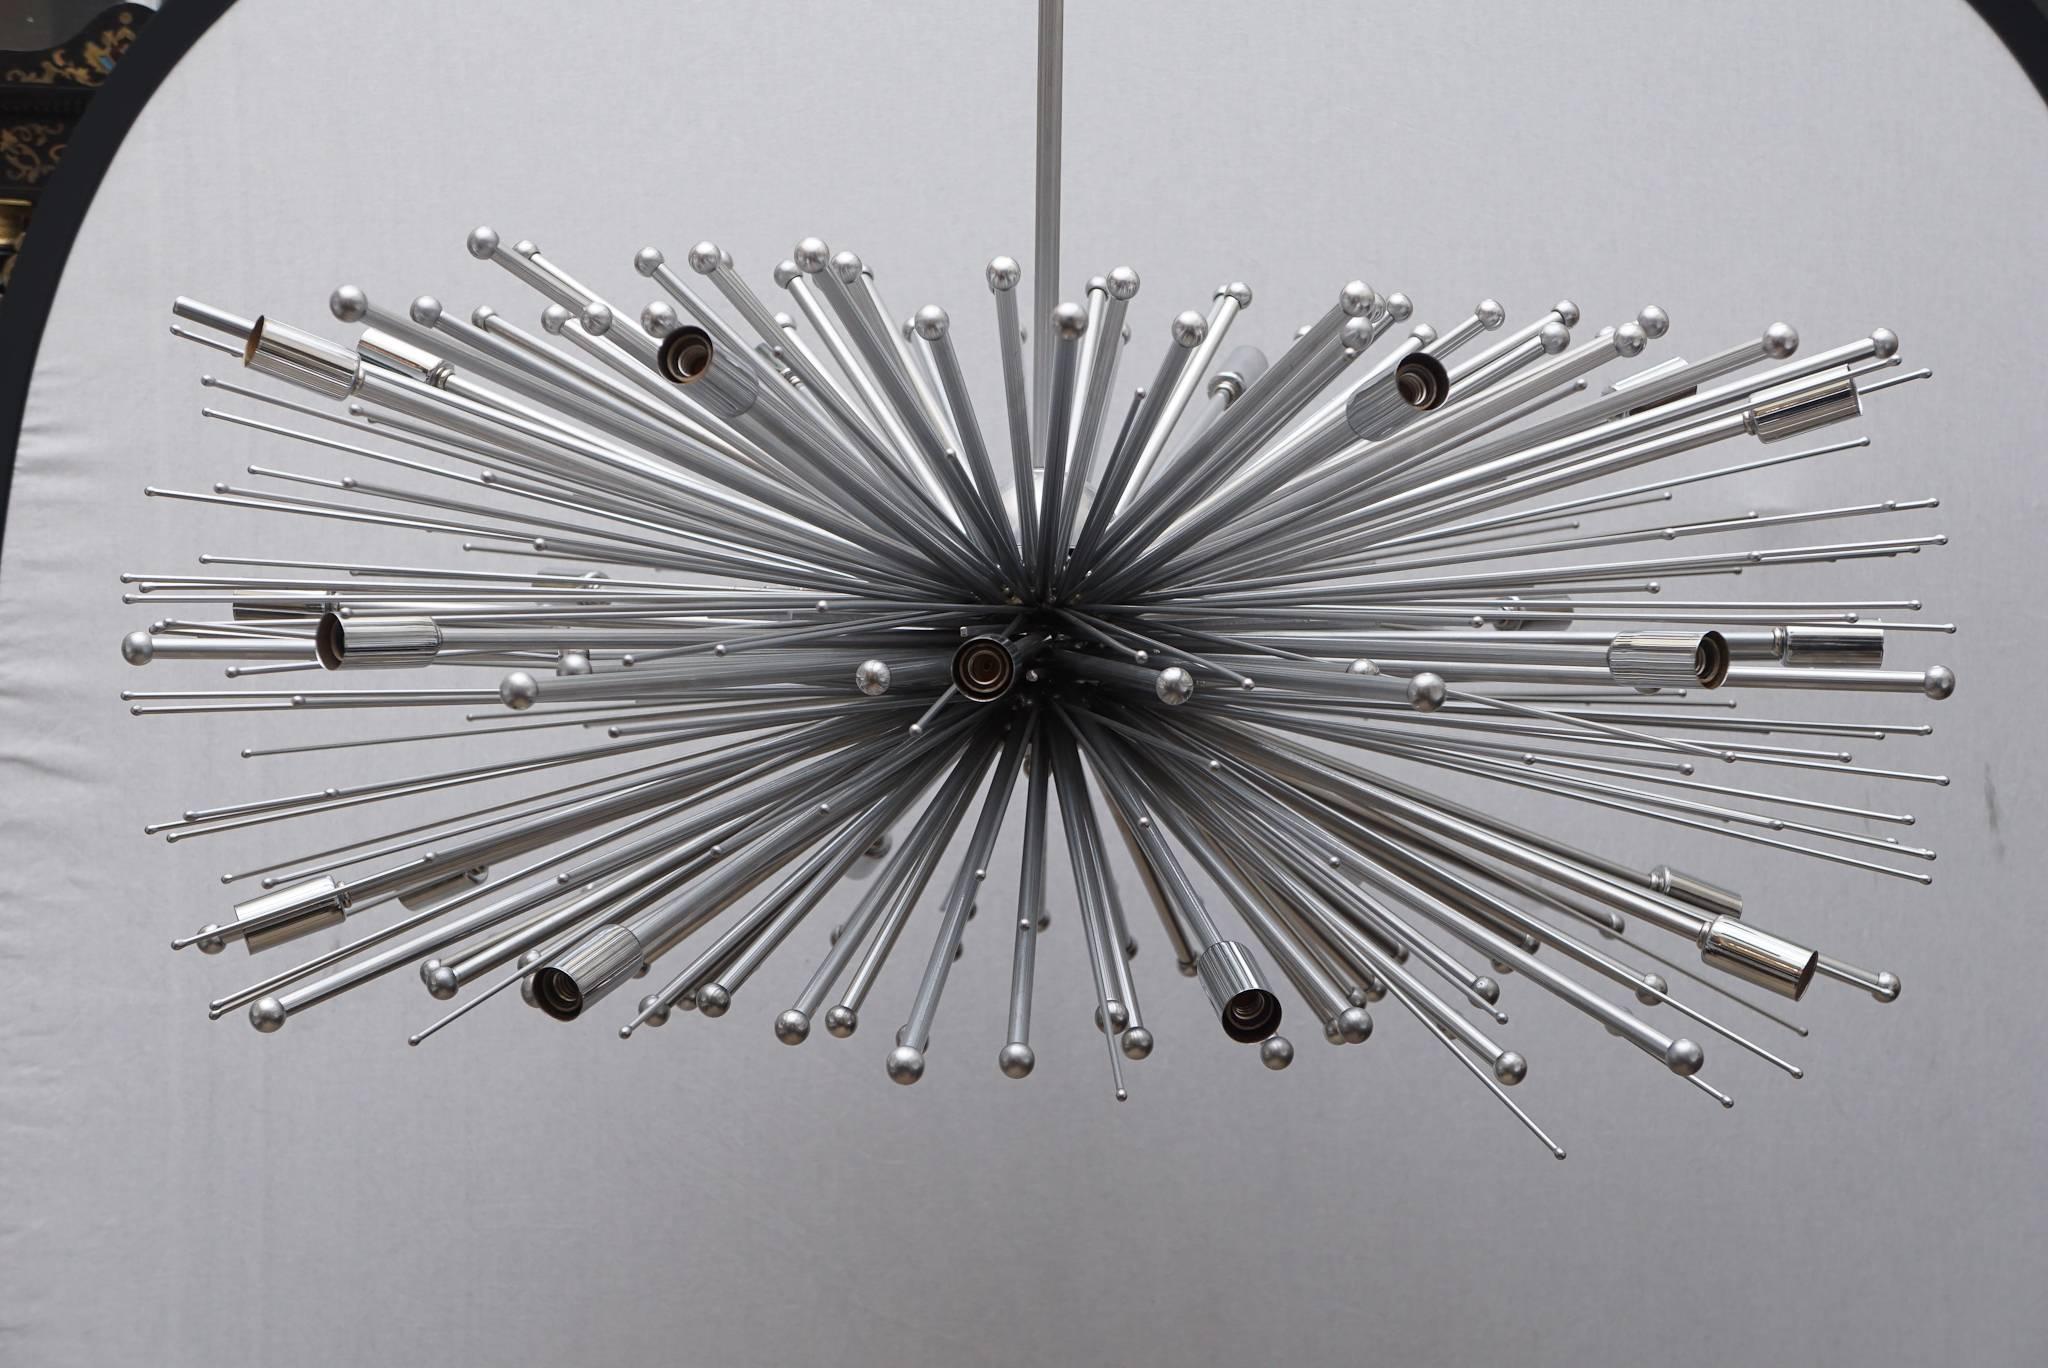 A handmade chandelier made with steel and bronze by Lou Blass with a polished nickel finish and accents. These chandeliers are custom and made to order with a variety of sizes and finishes. This chandelier has 24 lights, and the maximum wattage per